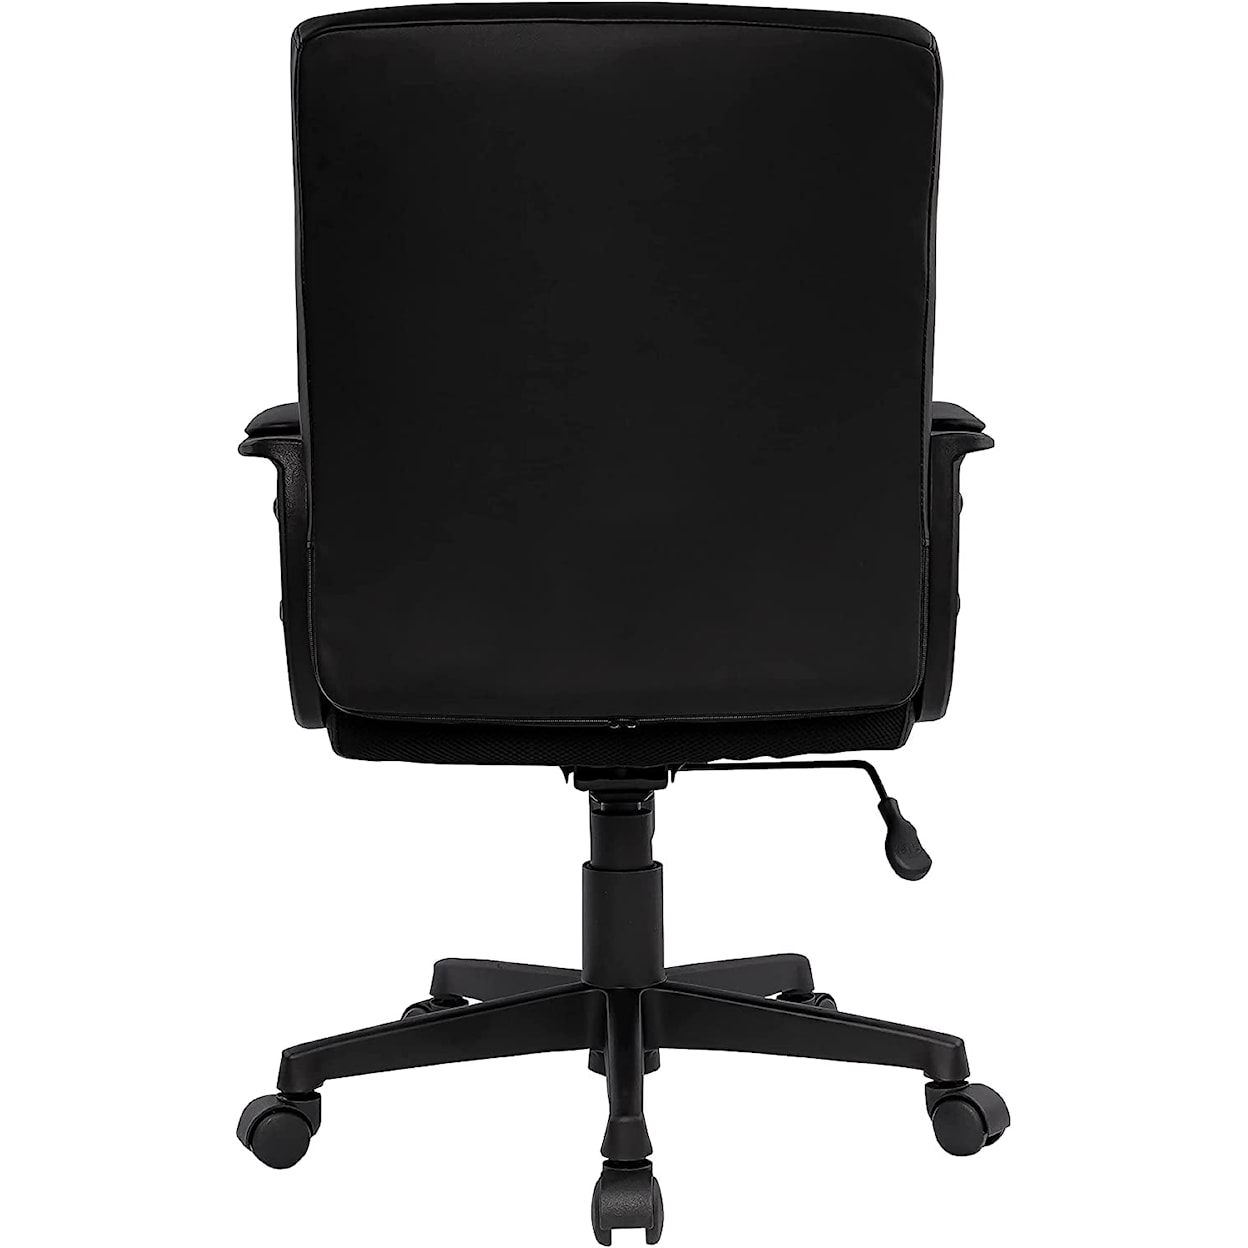 Sam's Furniture Office TERVINA LUXURA MID-BACK CHAIR